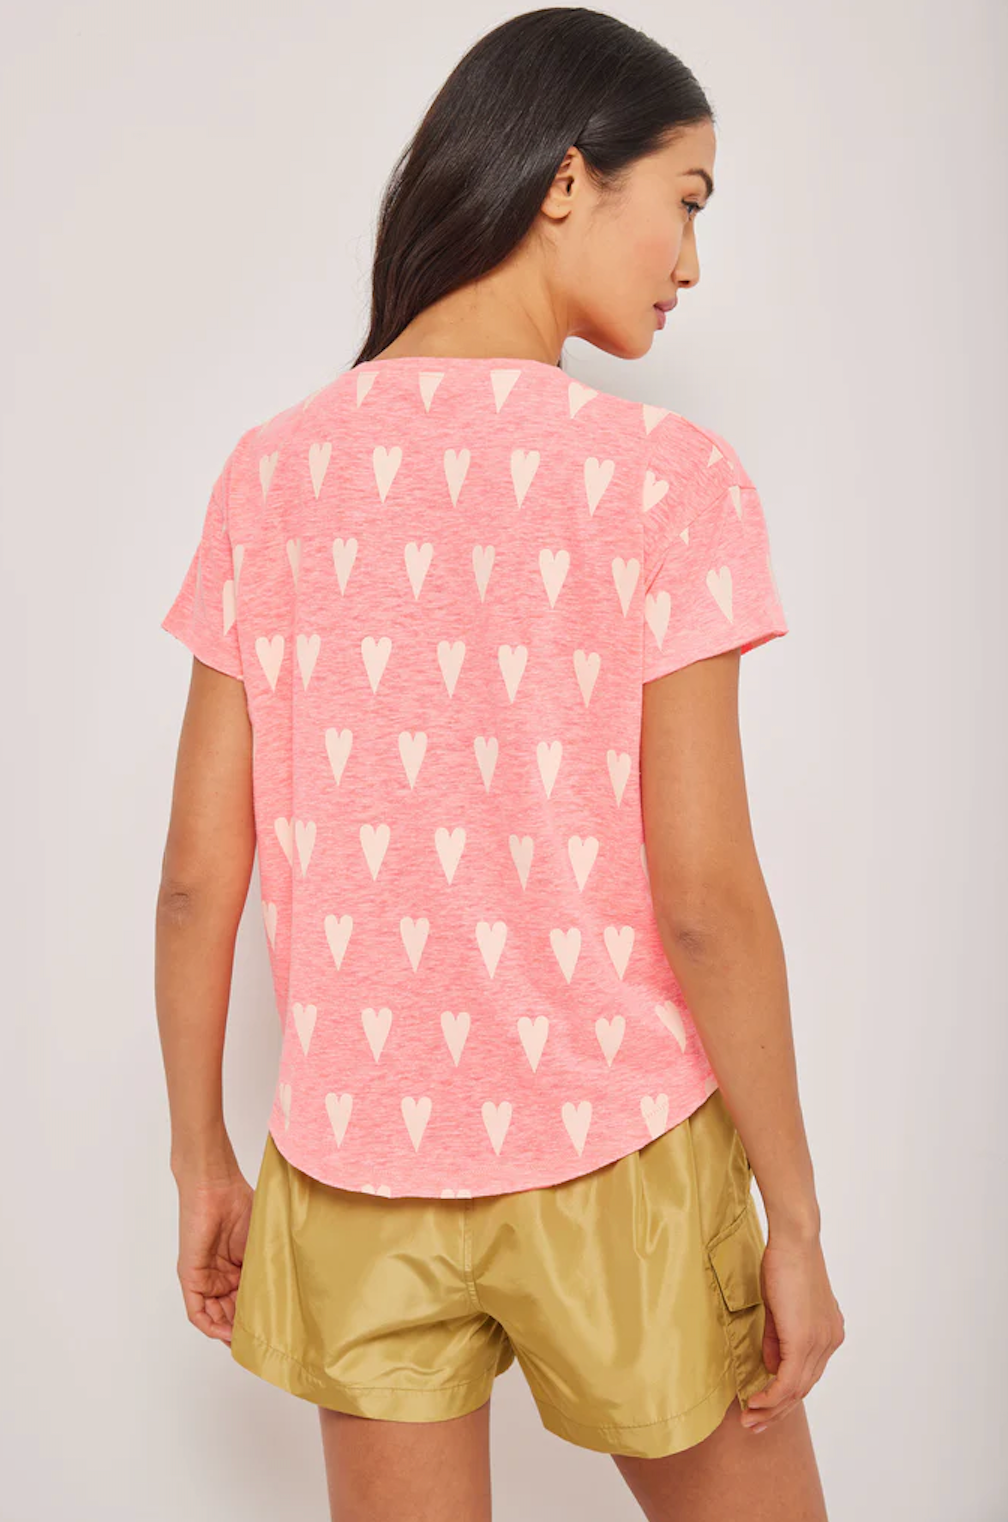 Lisa Todd Heart Hype Tee Think Pink